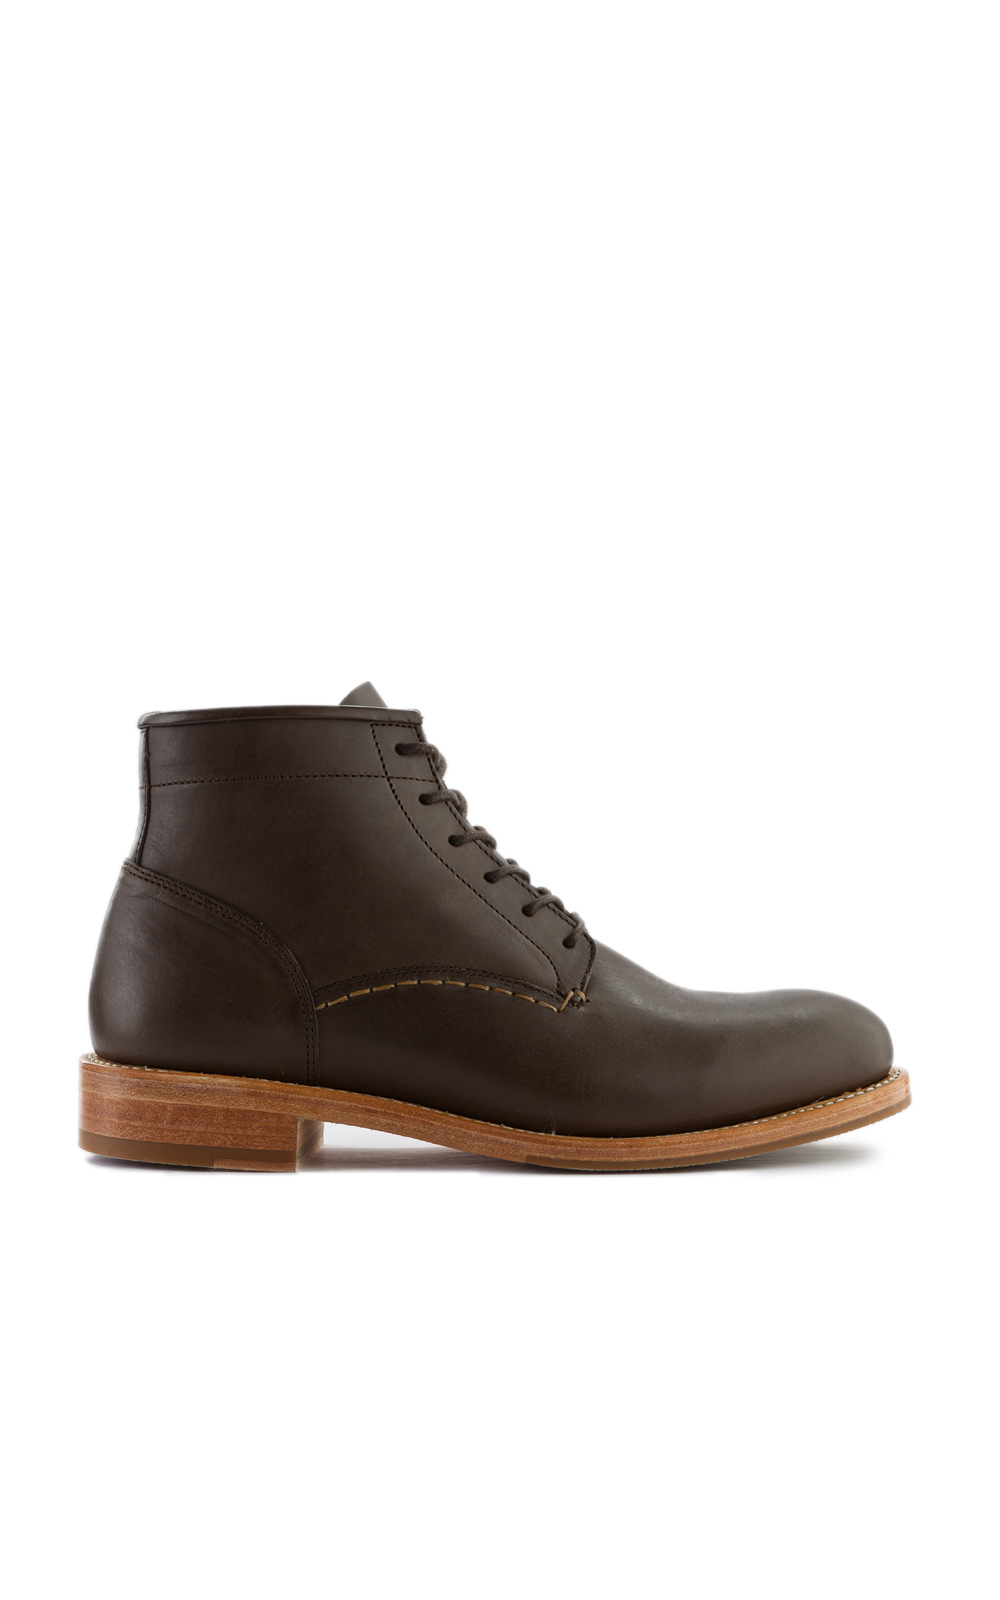 Vegetable Tanned Brown Leather Boots by Butts and Shoulders